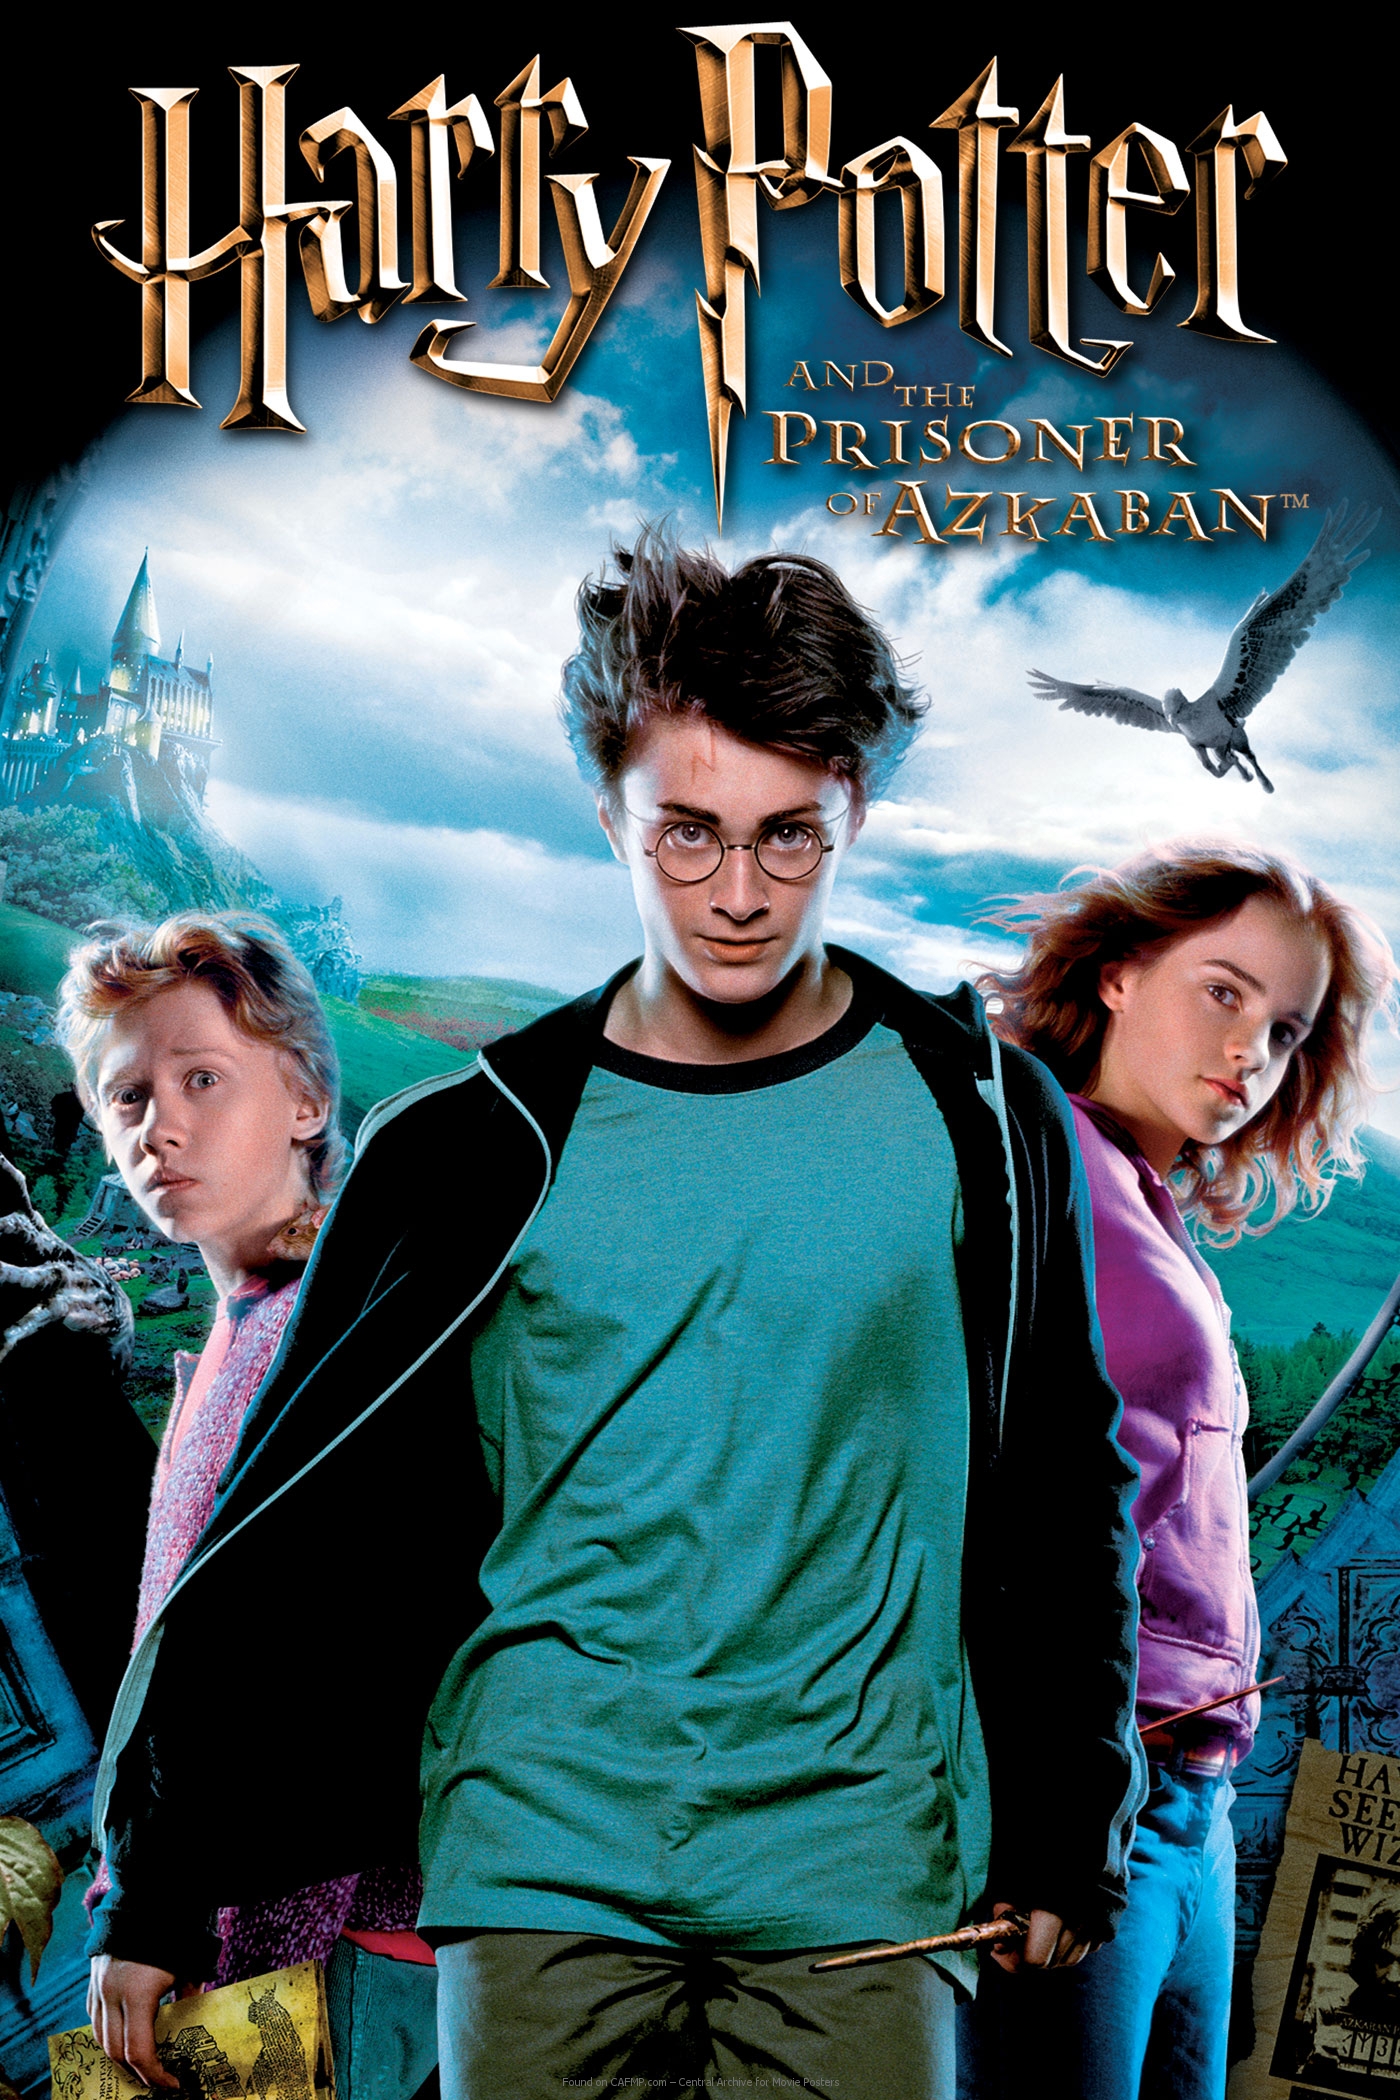 Movie Poster »Harry Potter and the Prisoner of Azkaban« on CAFMP